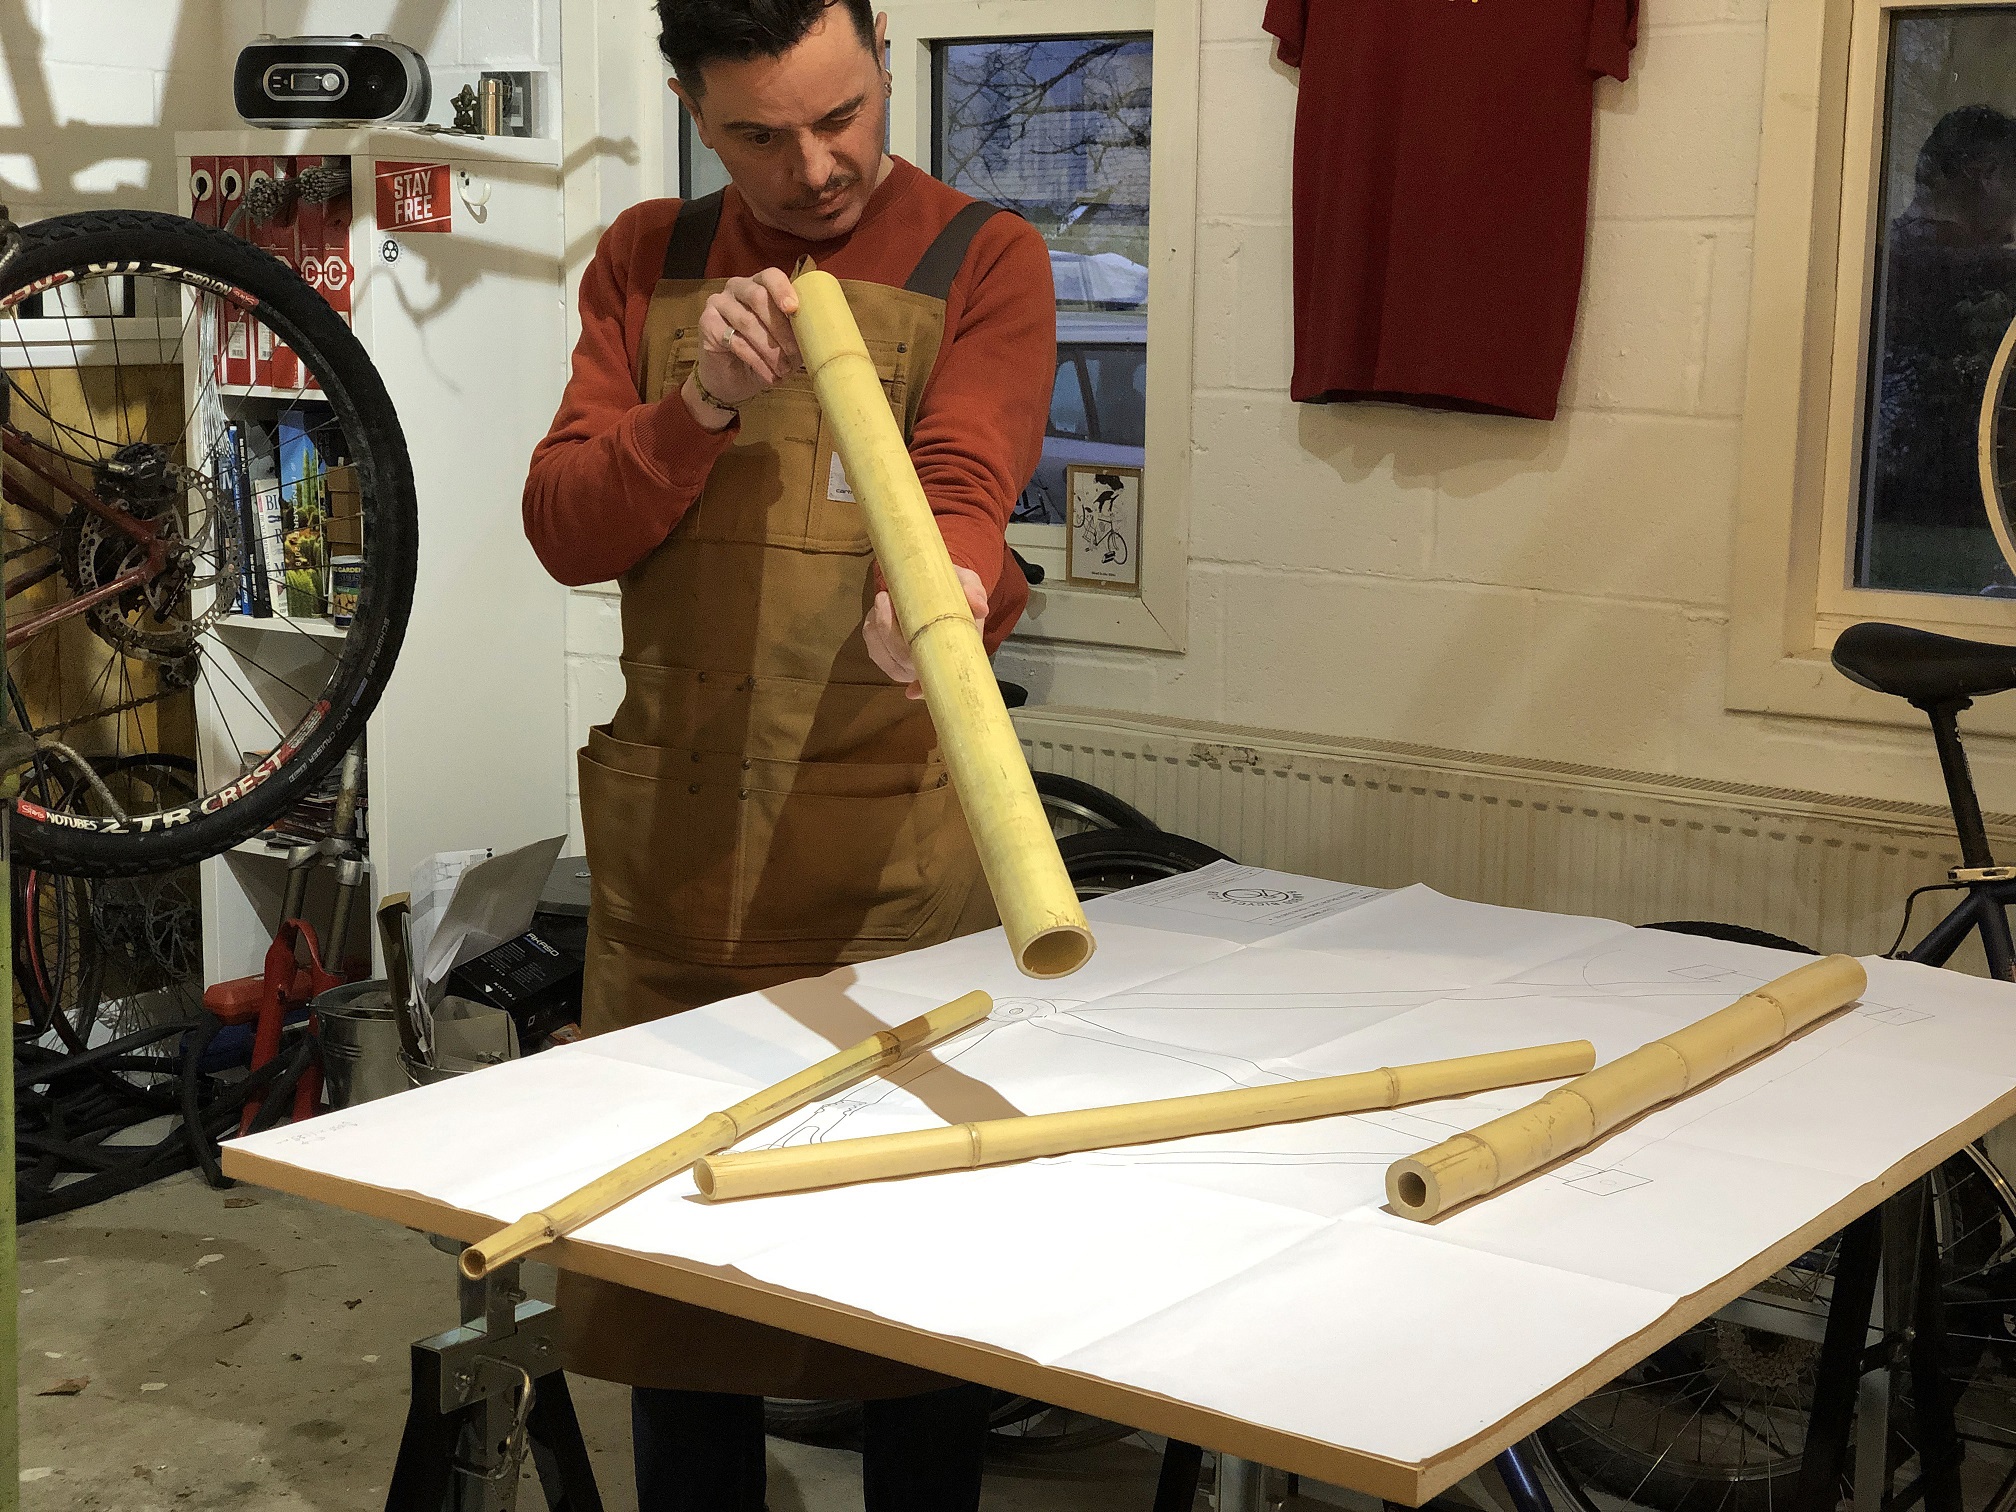 Ali Campbell is setting out to assemble a bamboo bike from a kit and then use it to take part in Etape Loch Ness in April